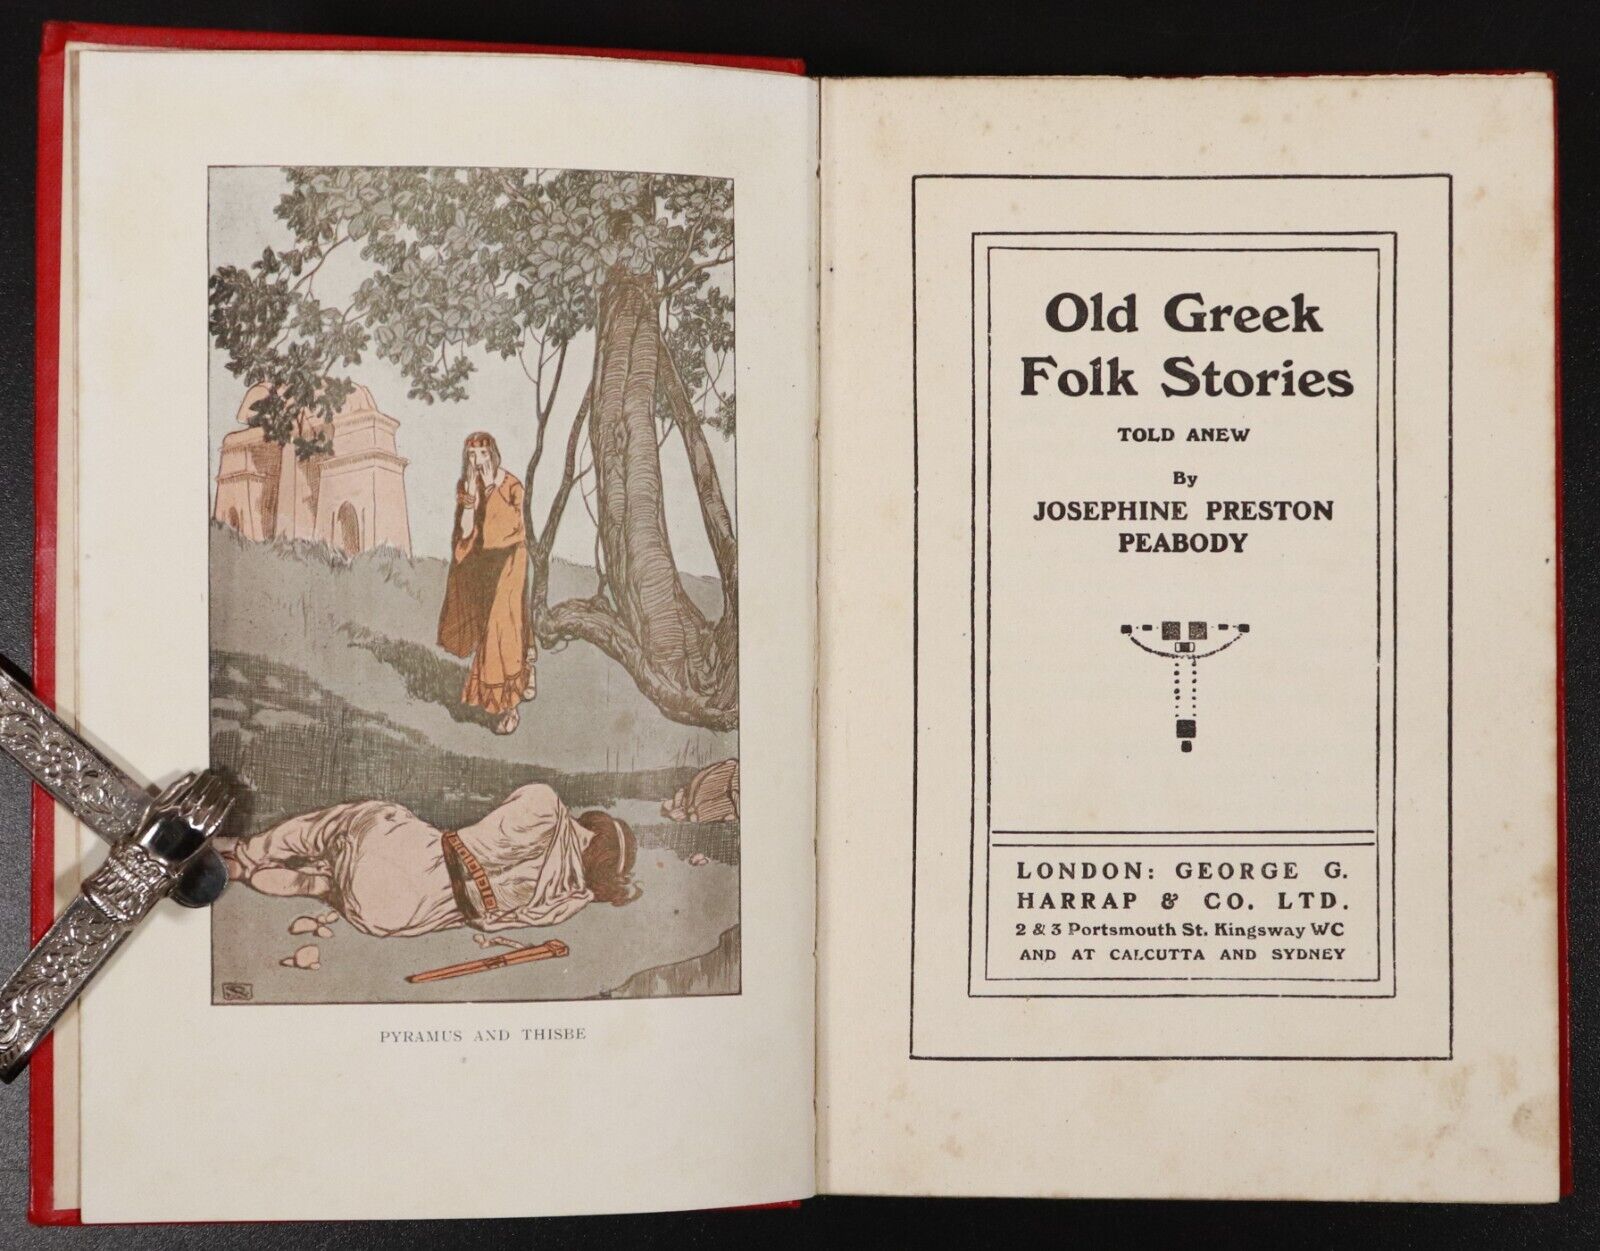 1925 Old Greek Folk Stories Told Anew by Josephine Preston Peabody Antique Book